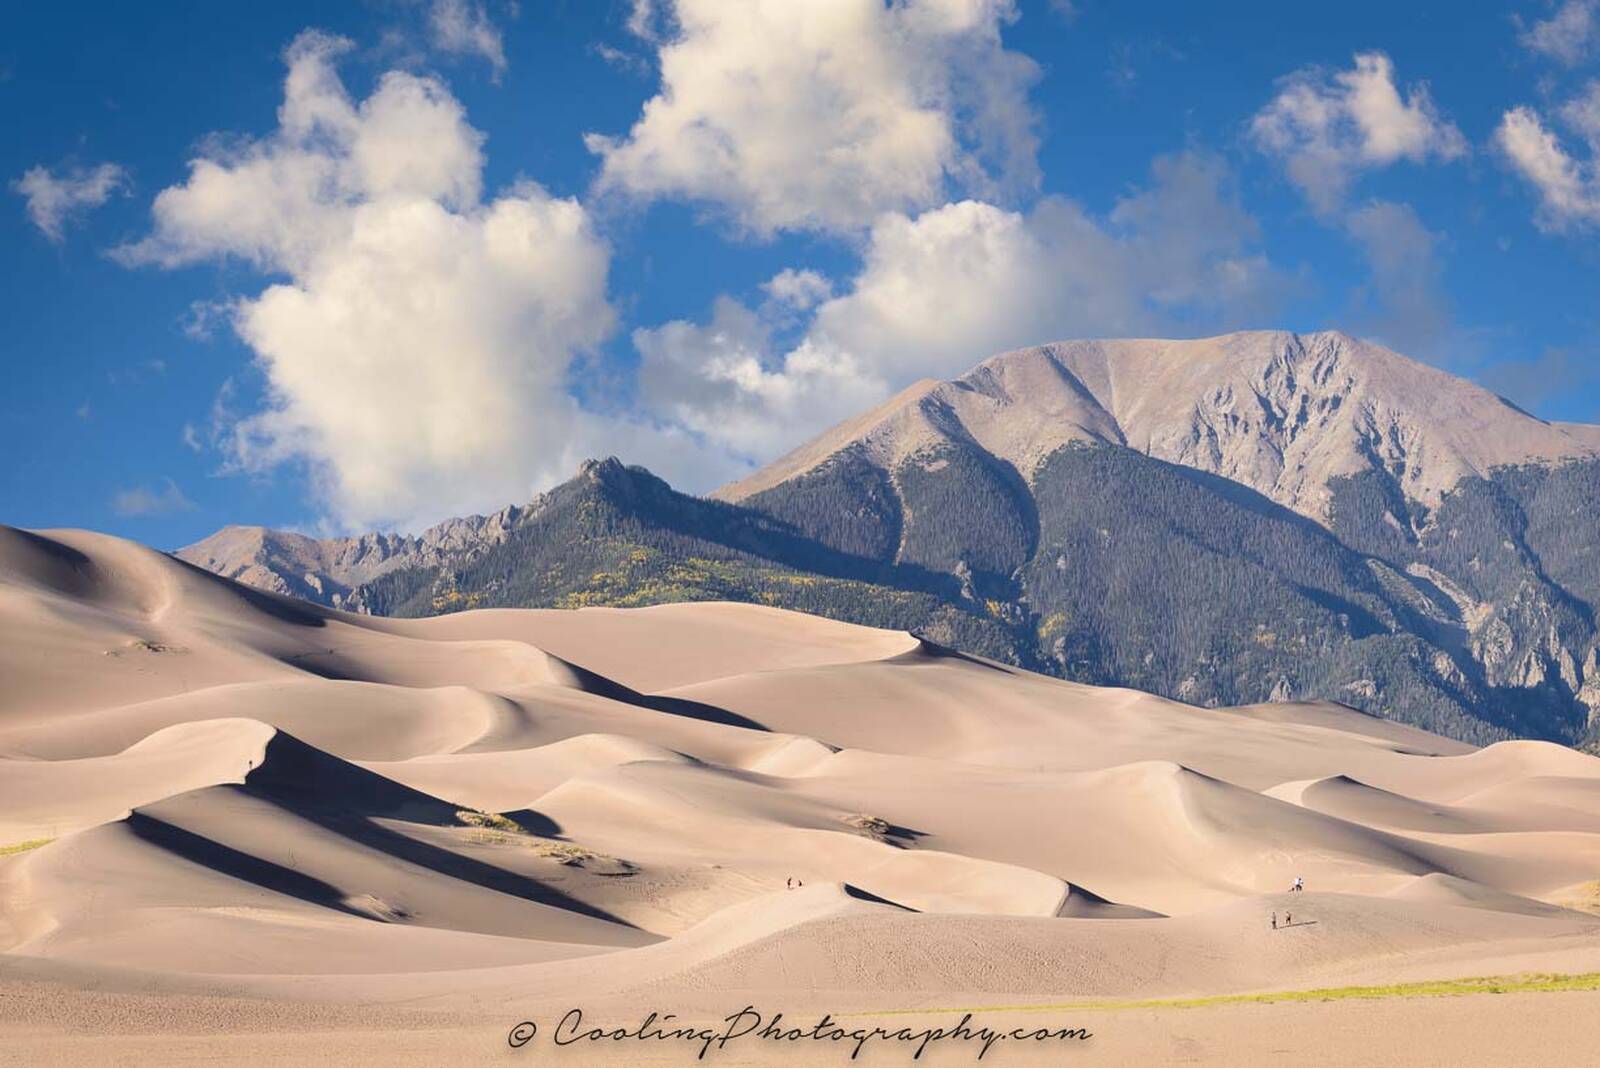 Image of Great Sand Dunes National Park - Dunes by norm cooling